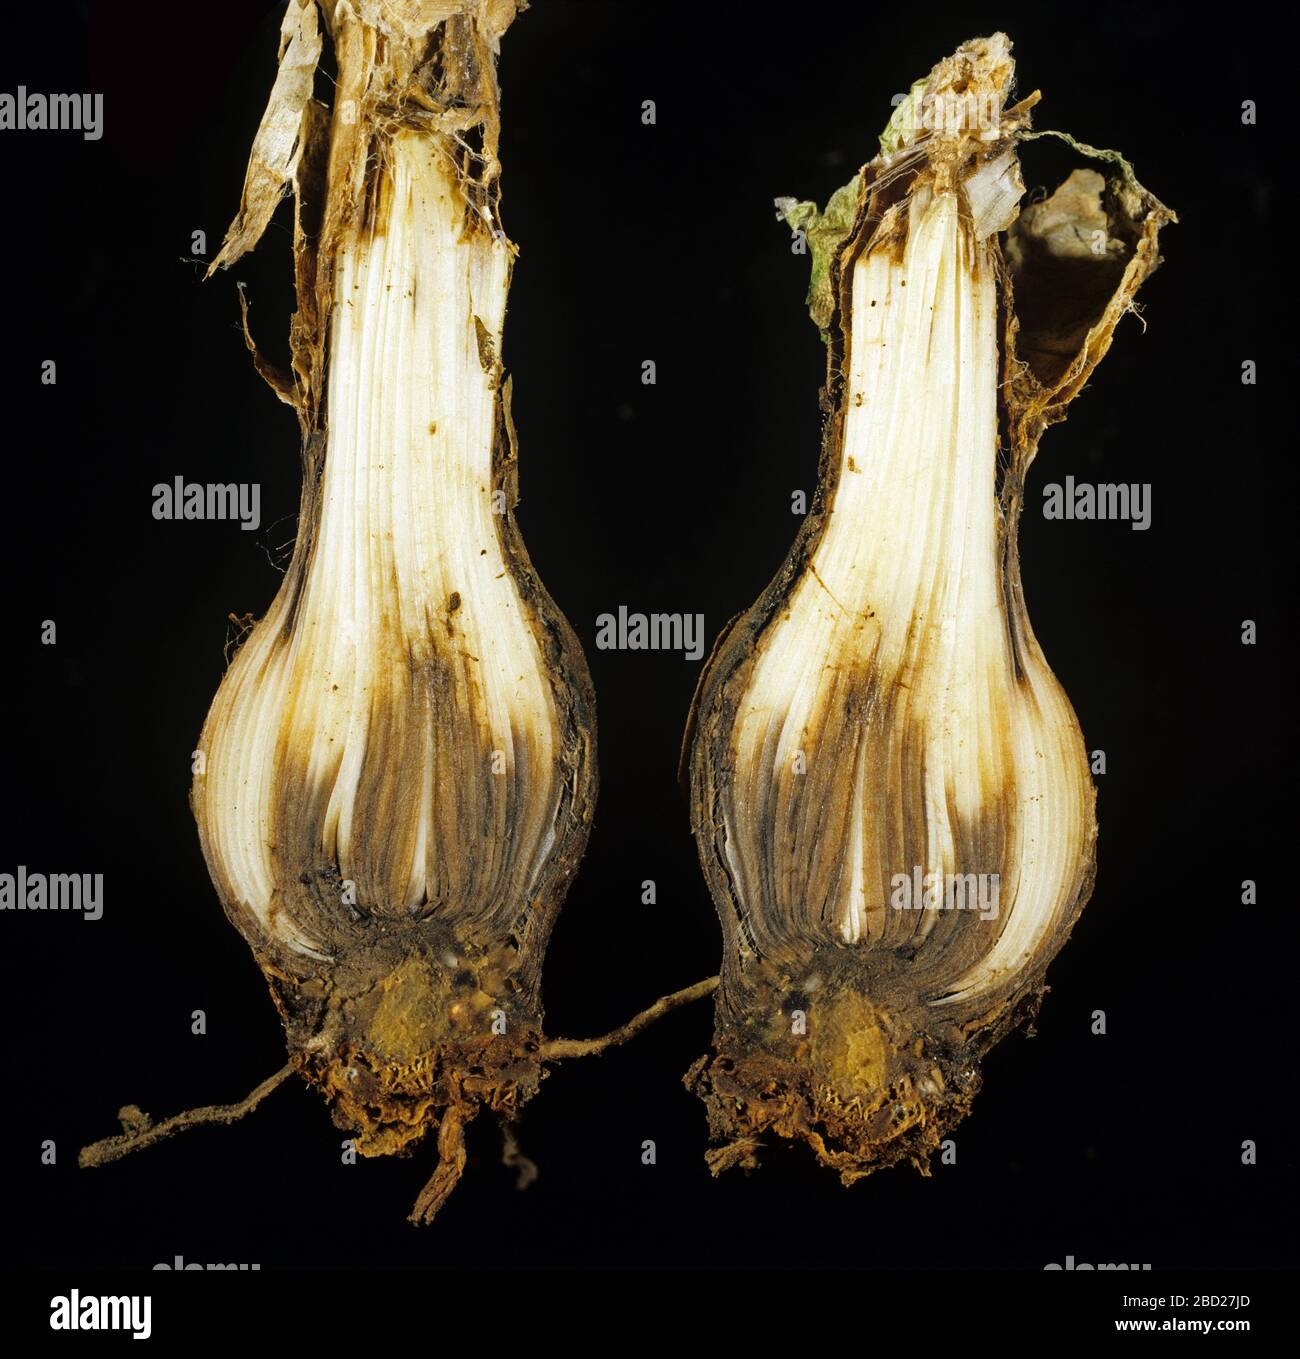 Necrosis caused by basal rot (Fusarium oxysporum) shown in a section of a nerine (Nerine bowenii) bulb Stock Photo